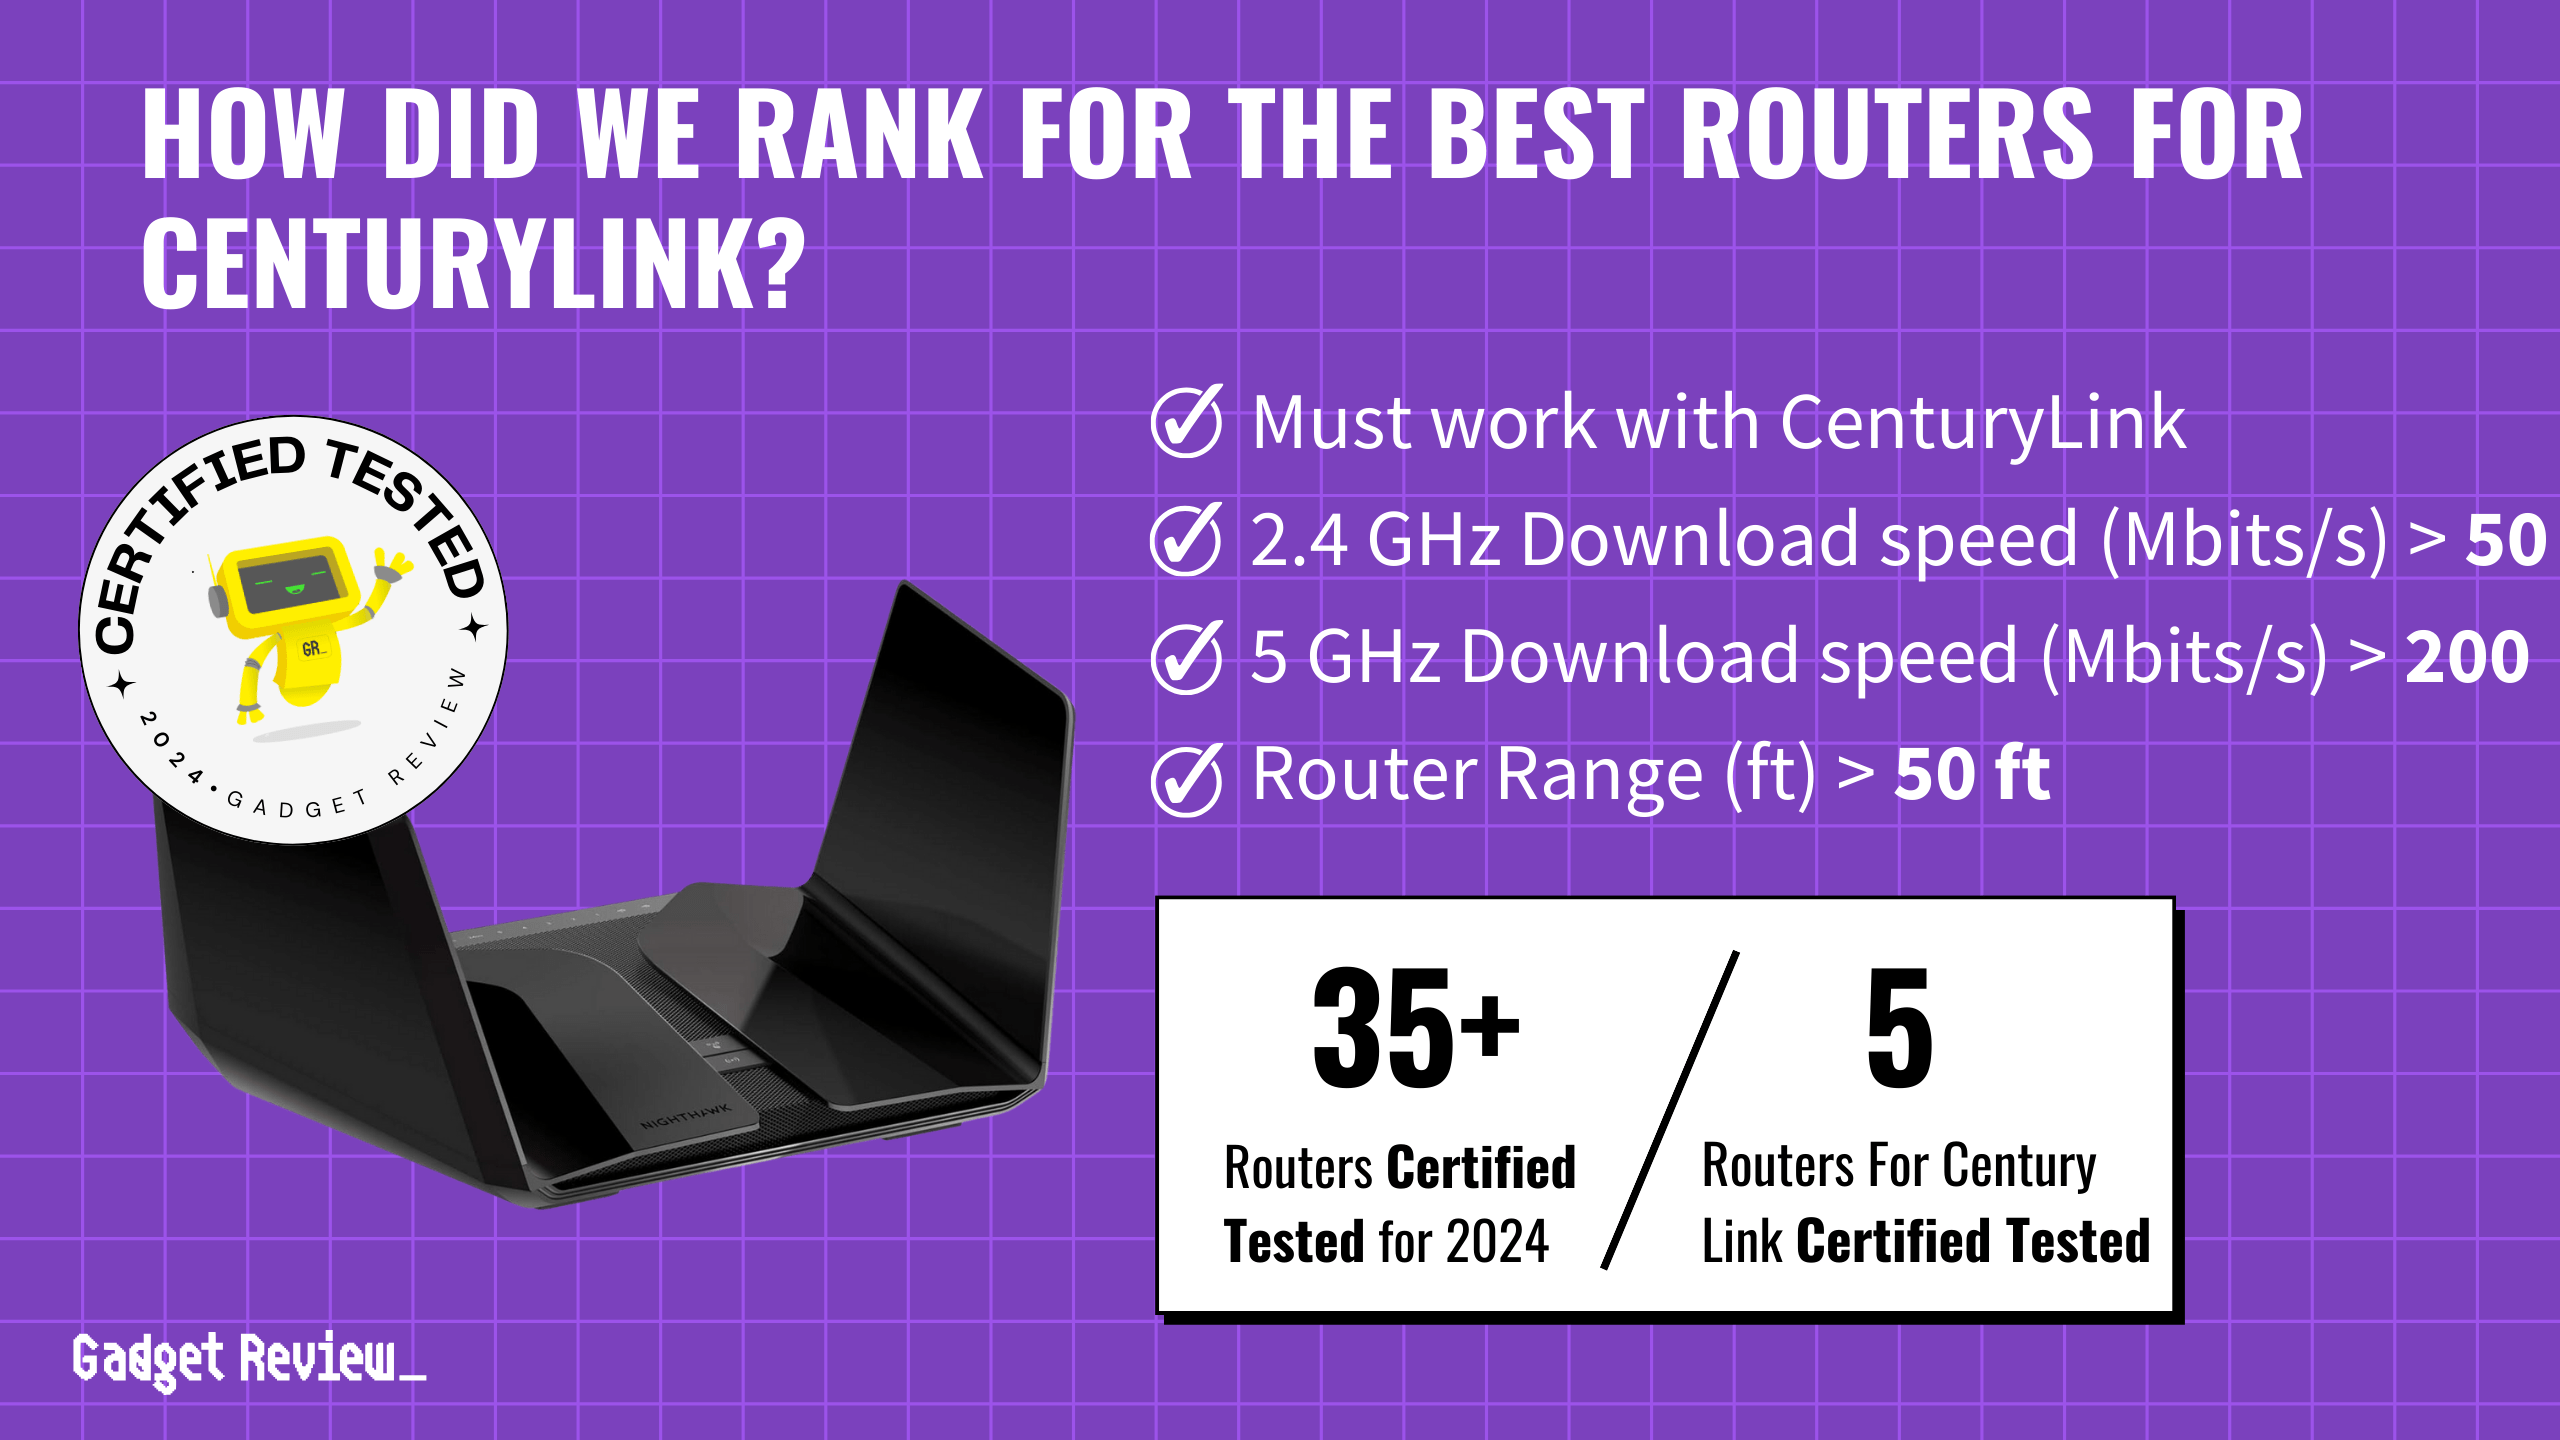 What are the Top 5 Routers for CenturyLink?